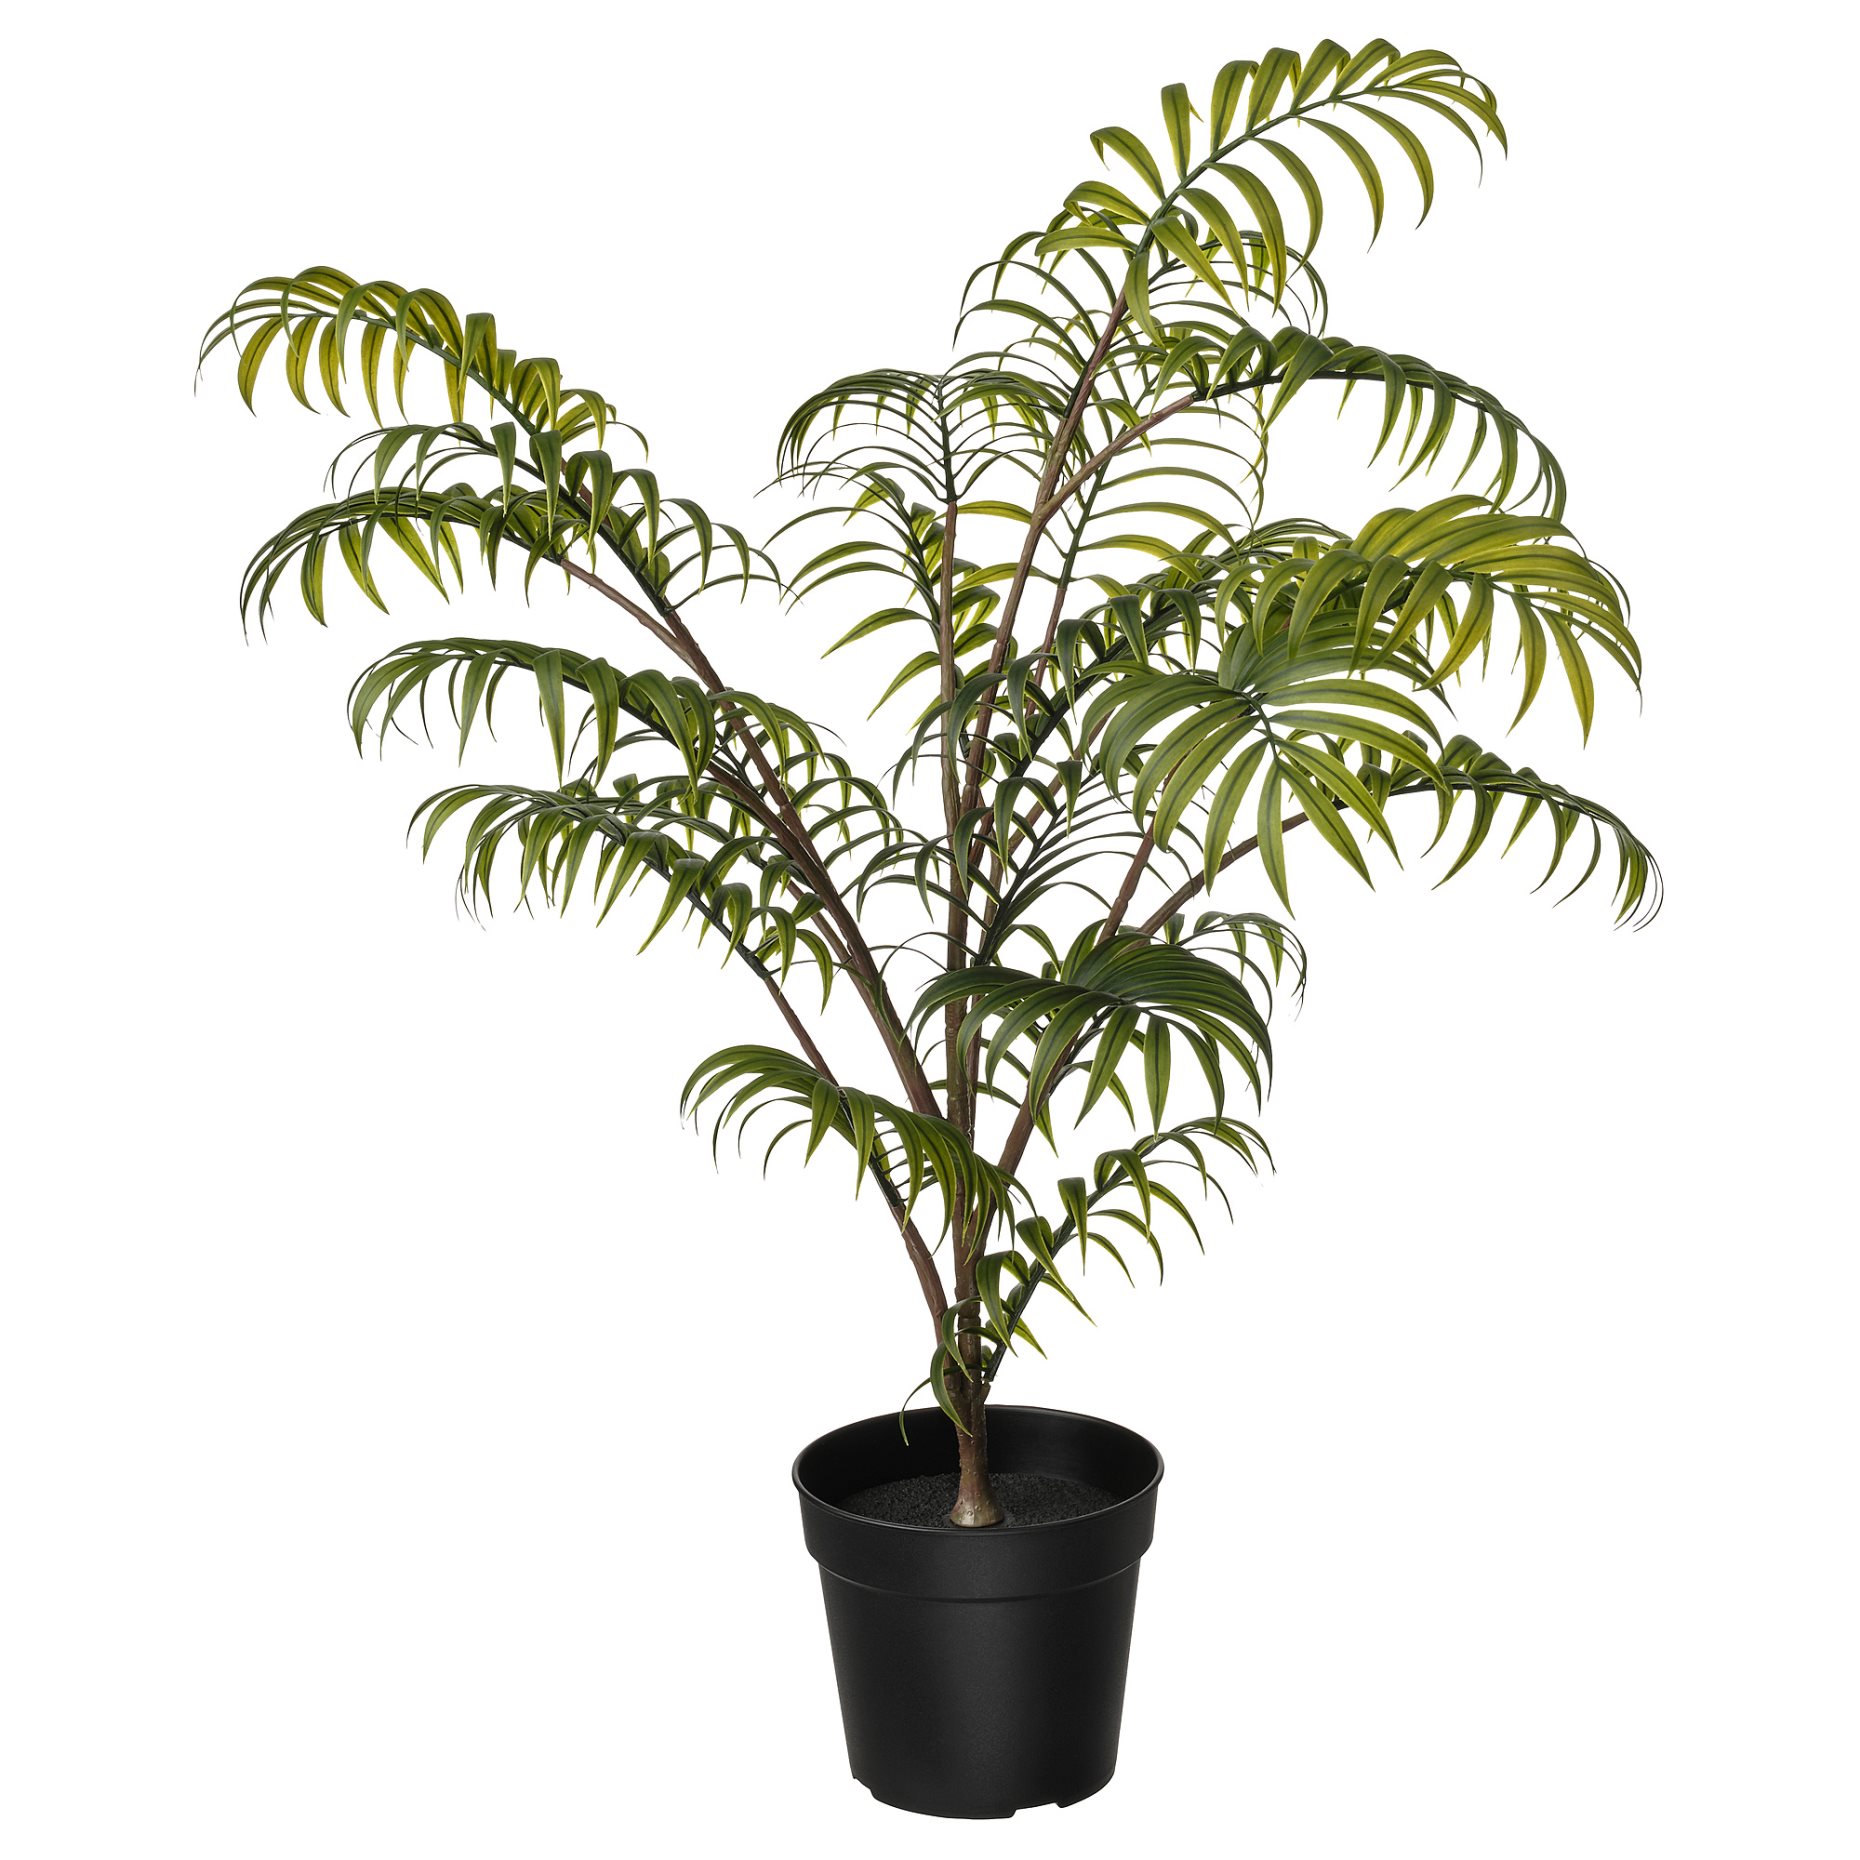 FEJKA, artificial potted plant/in/outdoor/palm, 15 cm, 305.380.04